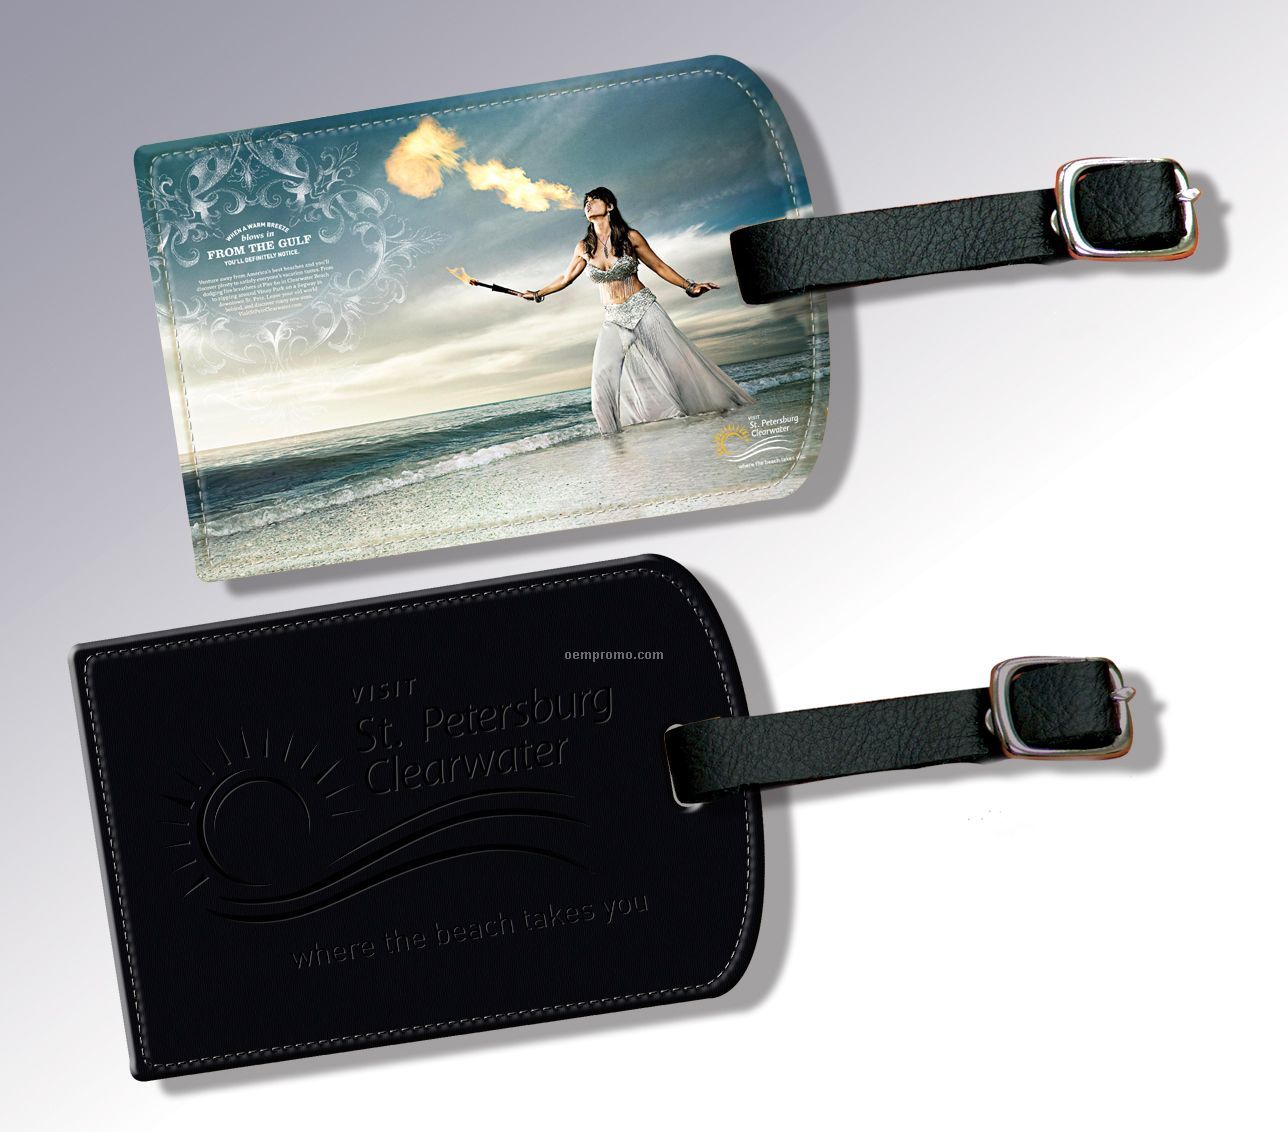 "Value" Leather Luggage Tag